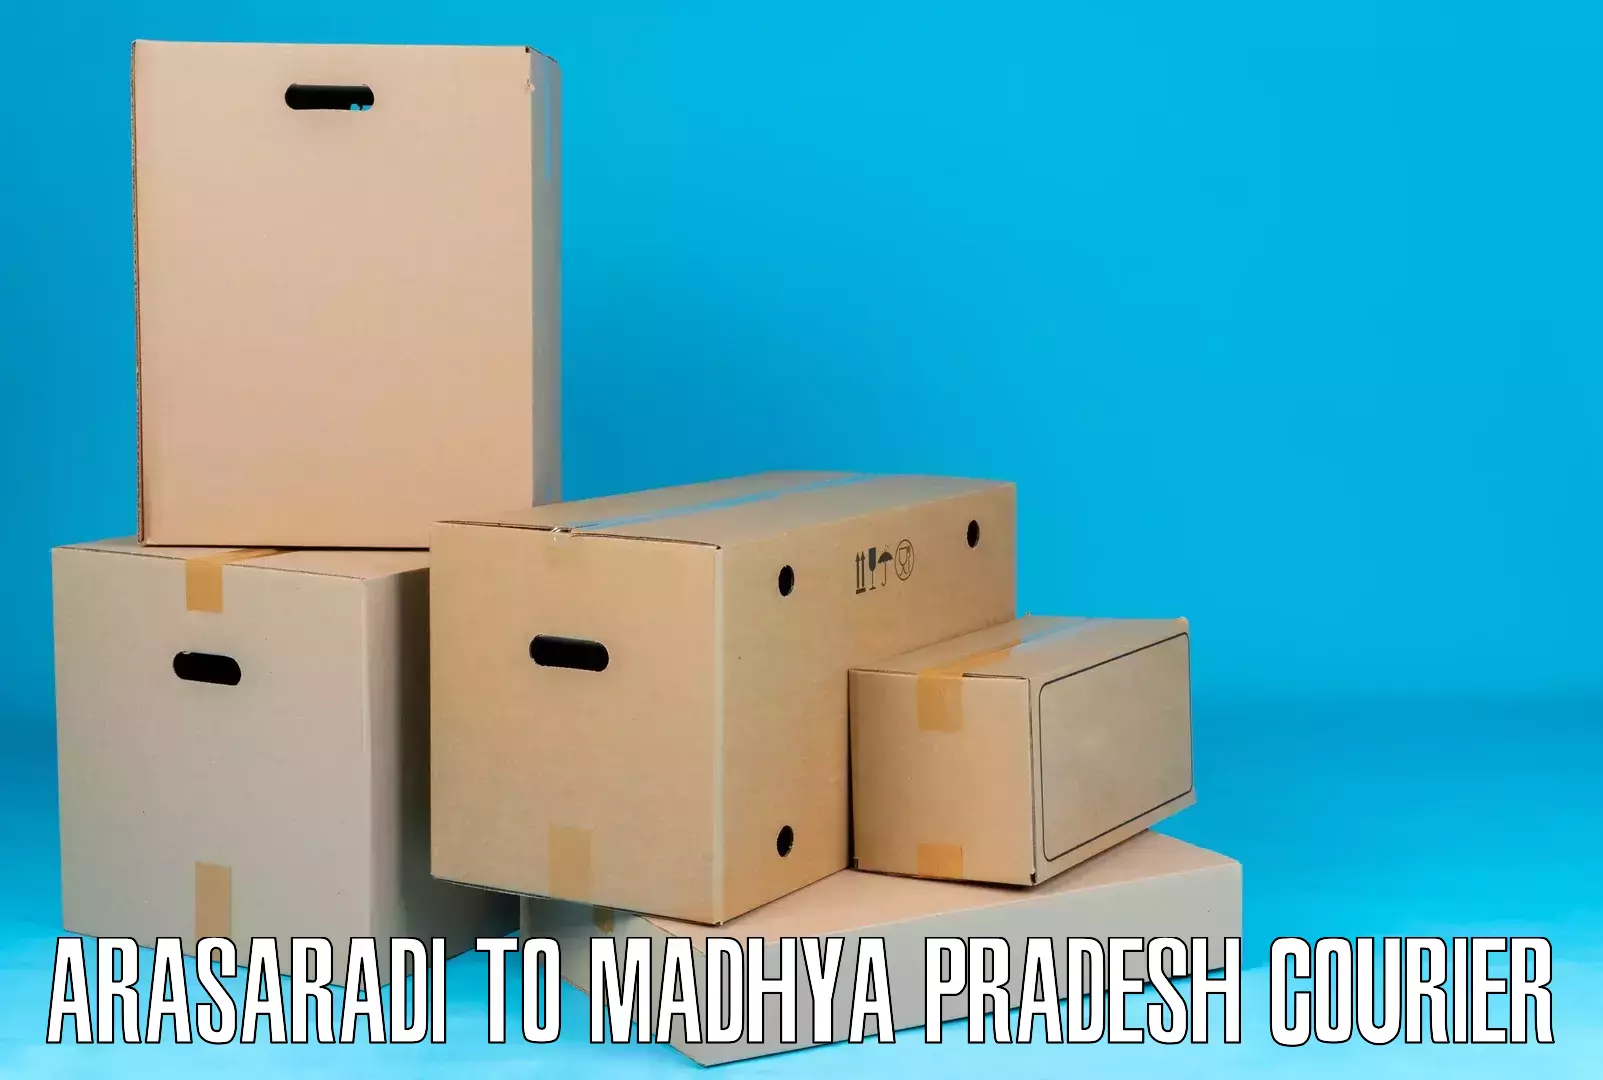 Next-generation courier services Arasaradi to Gwalior